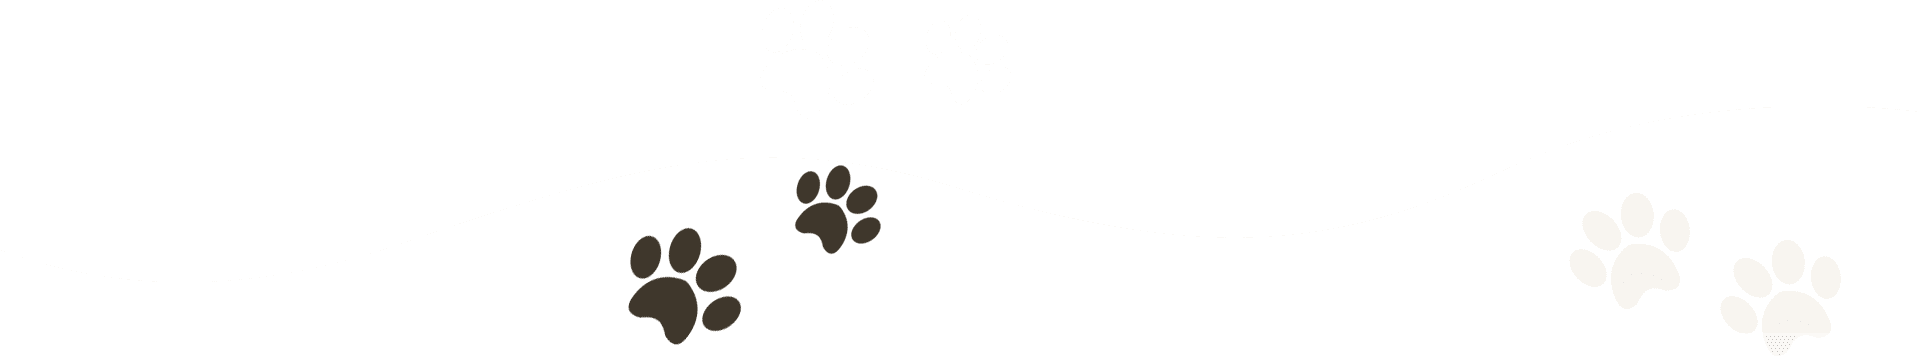 A green background with two white paws and one brown paw.